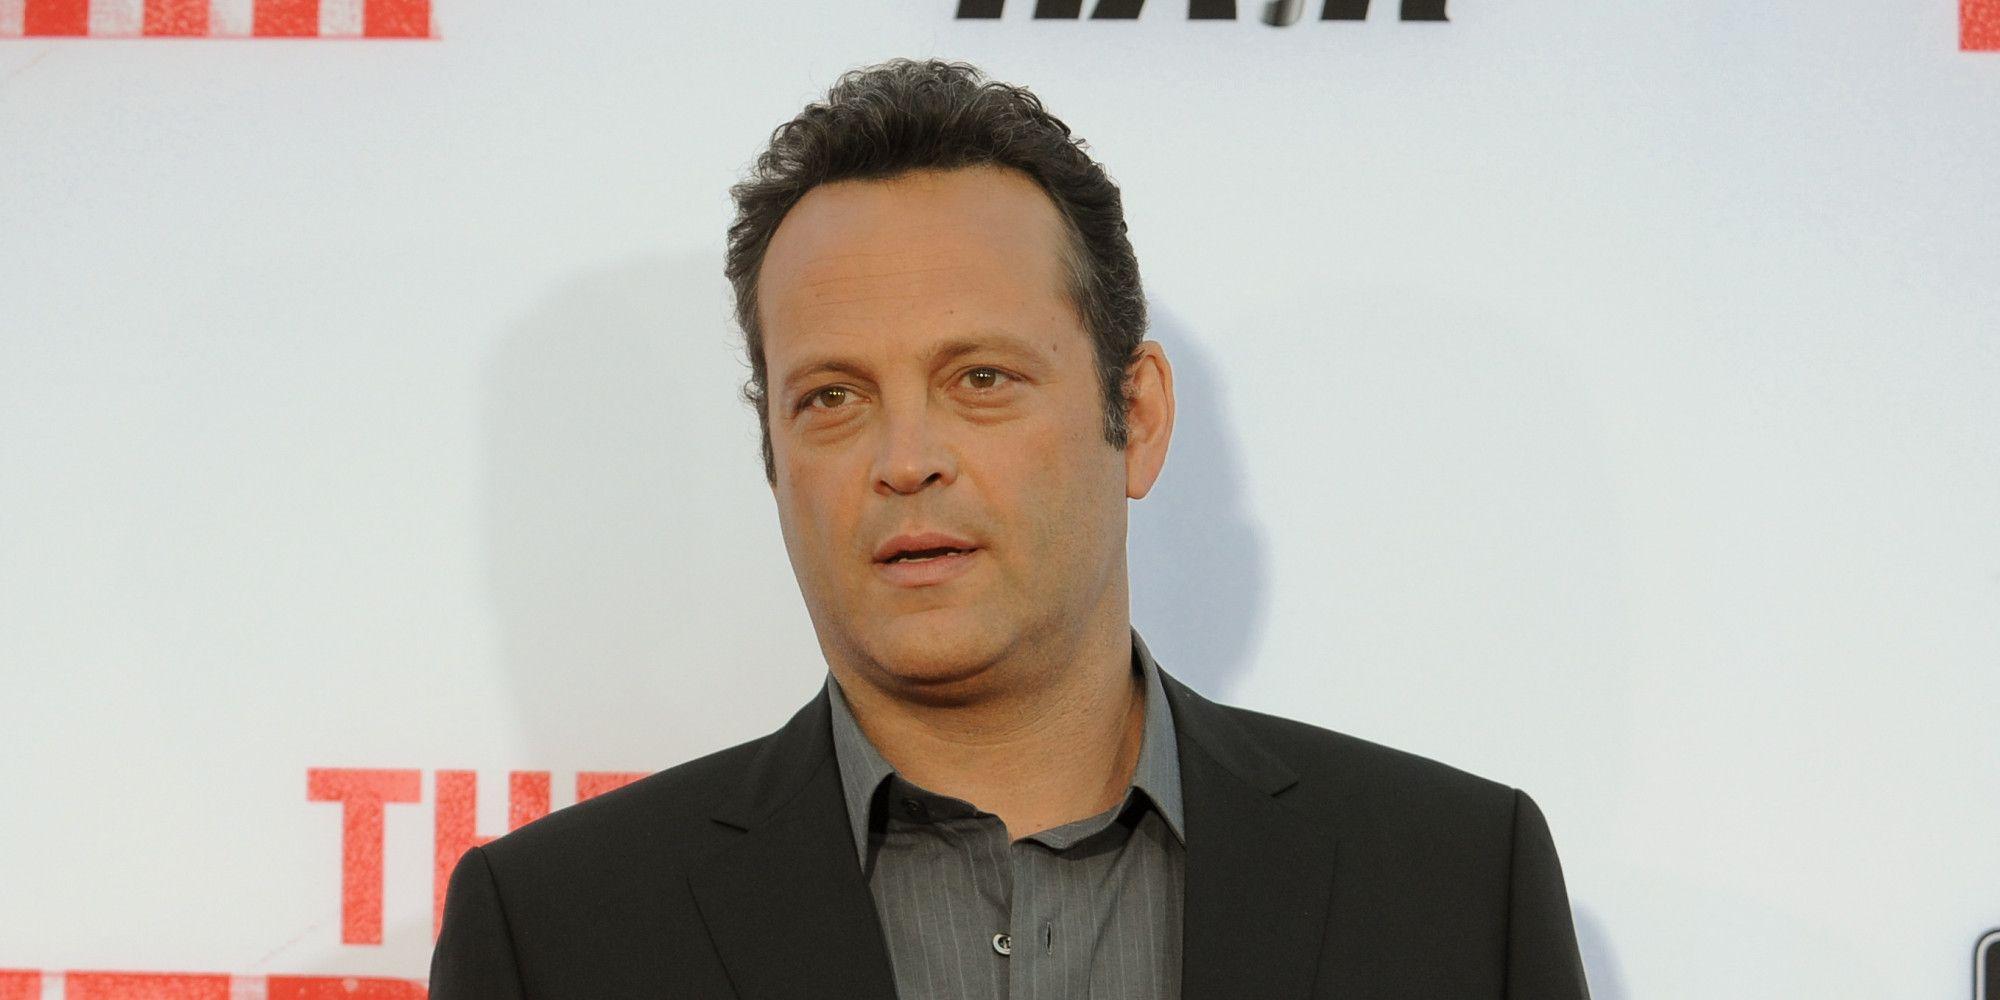 Vince Vaughn Wallpaper Image Photo Picture Background